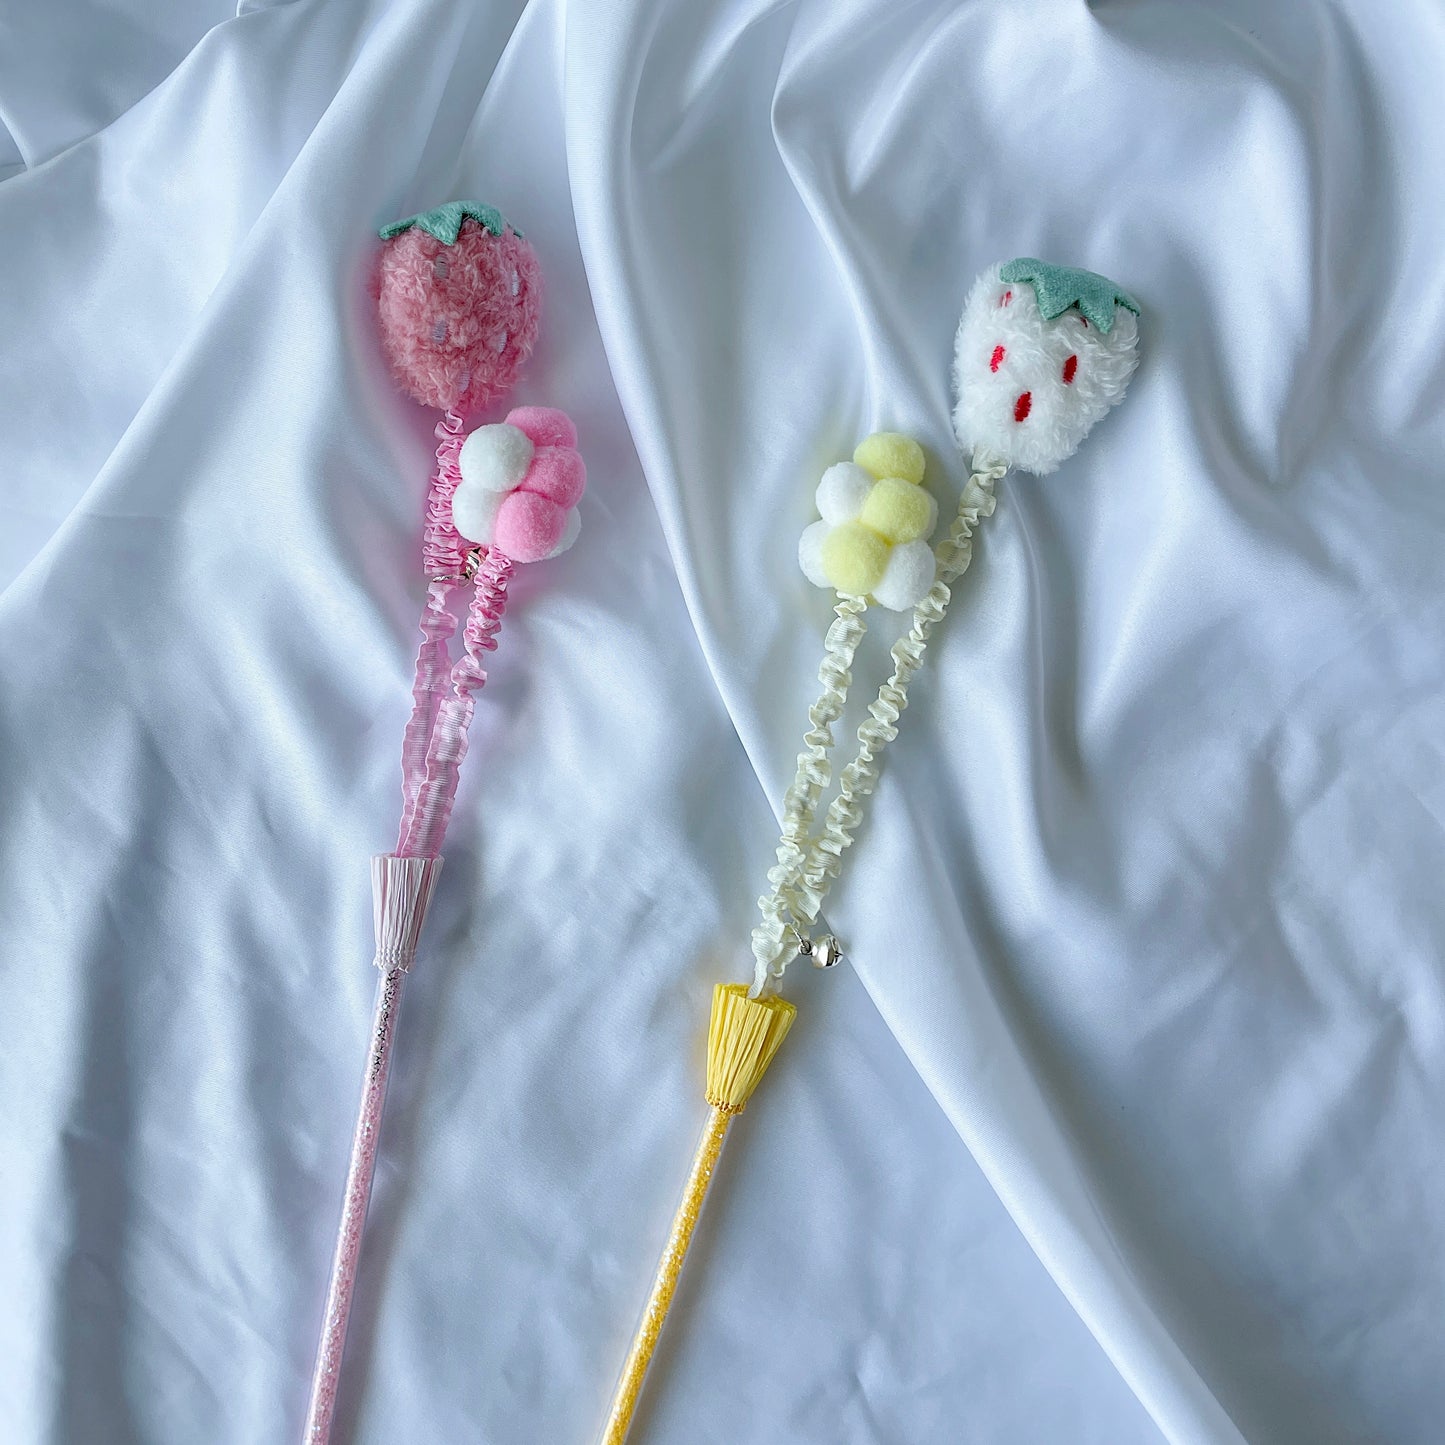 Fuzzy Strawberry Wand Cat Teaser Toy with Bells - Lil Wild Pets